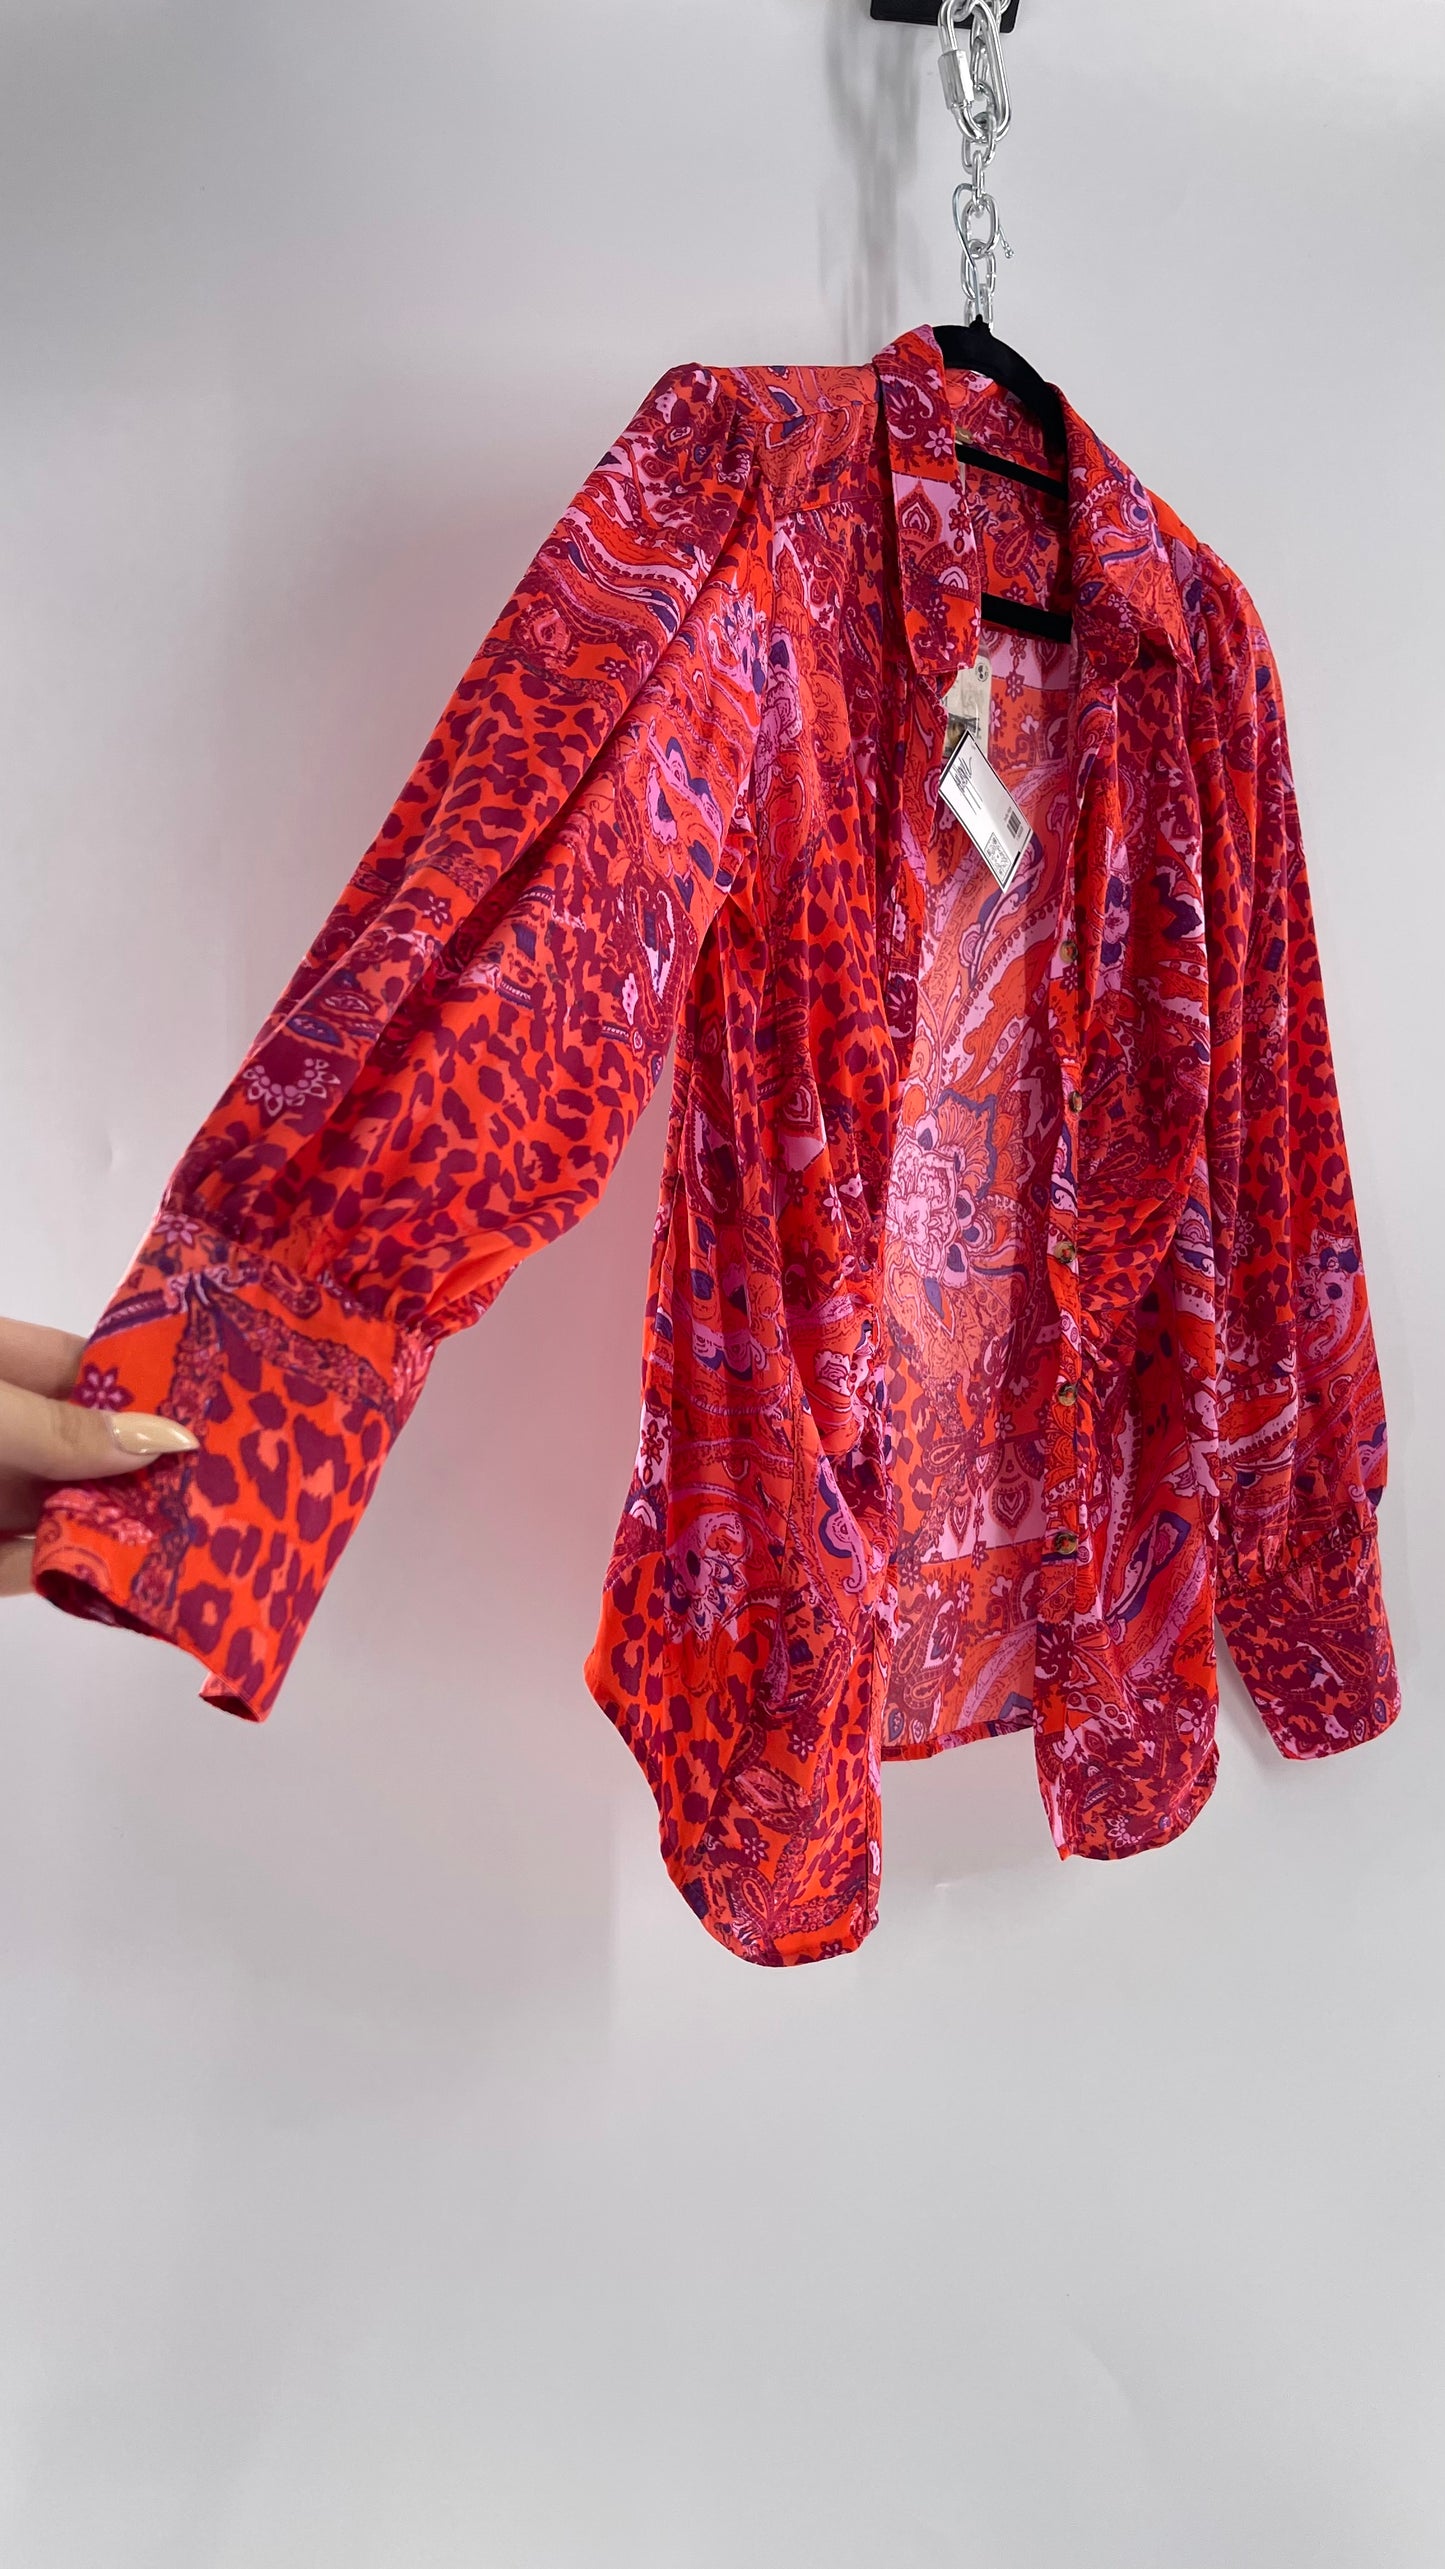 Free People Red, Neon Orange   Leopard Paisley Patterned Button Front(Medium)